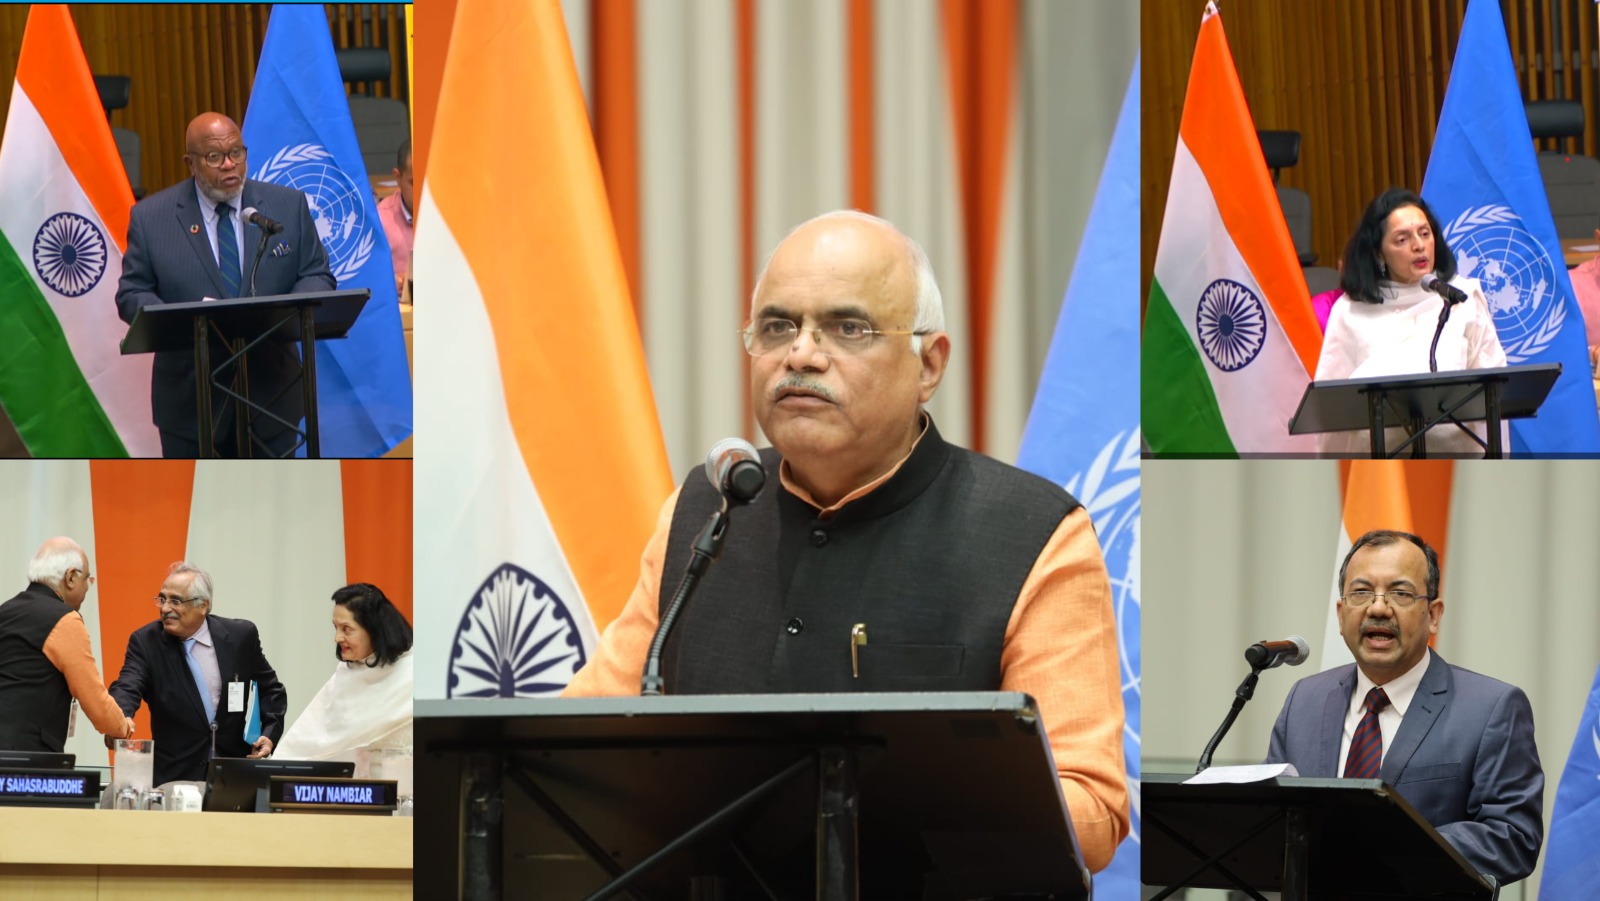 On 10 October 2023, ICCR and Permanent Mission of India to the United Nations (UN) organised an international conference on 'Vasudhaiva Kutumbakam' at the United Nations HQ, NY, US